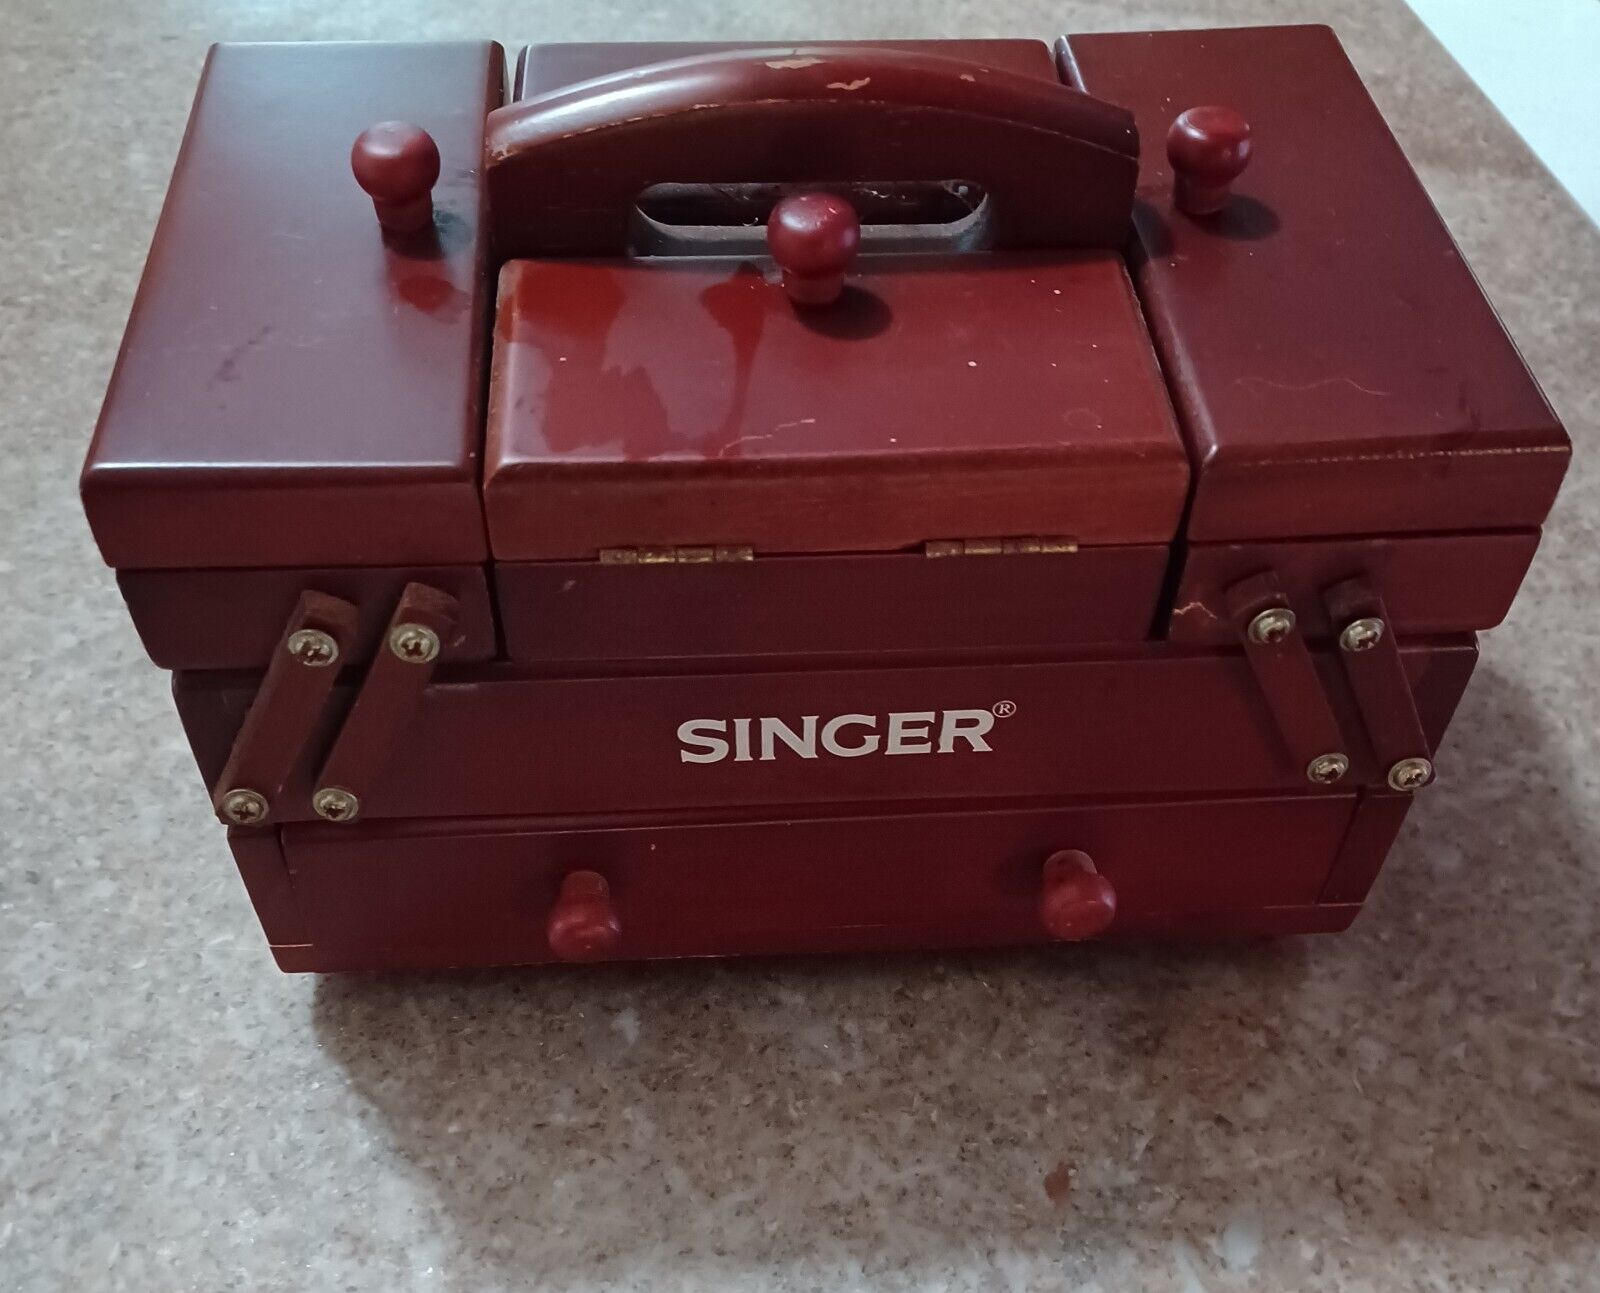 Vintage Singer Wooden Fold Out Small Sewing Notion Box Full Of Thread